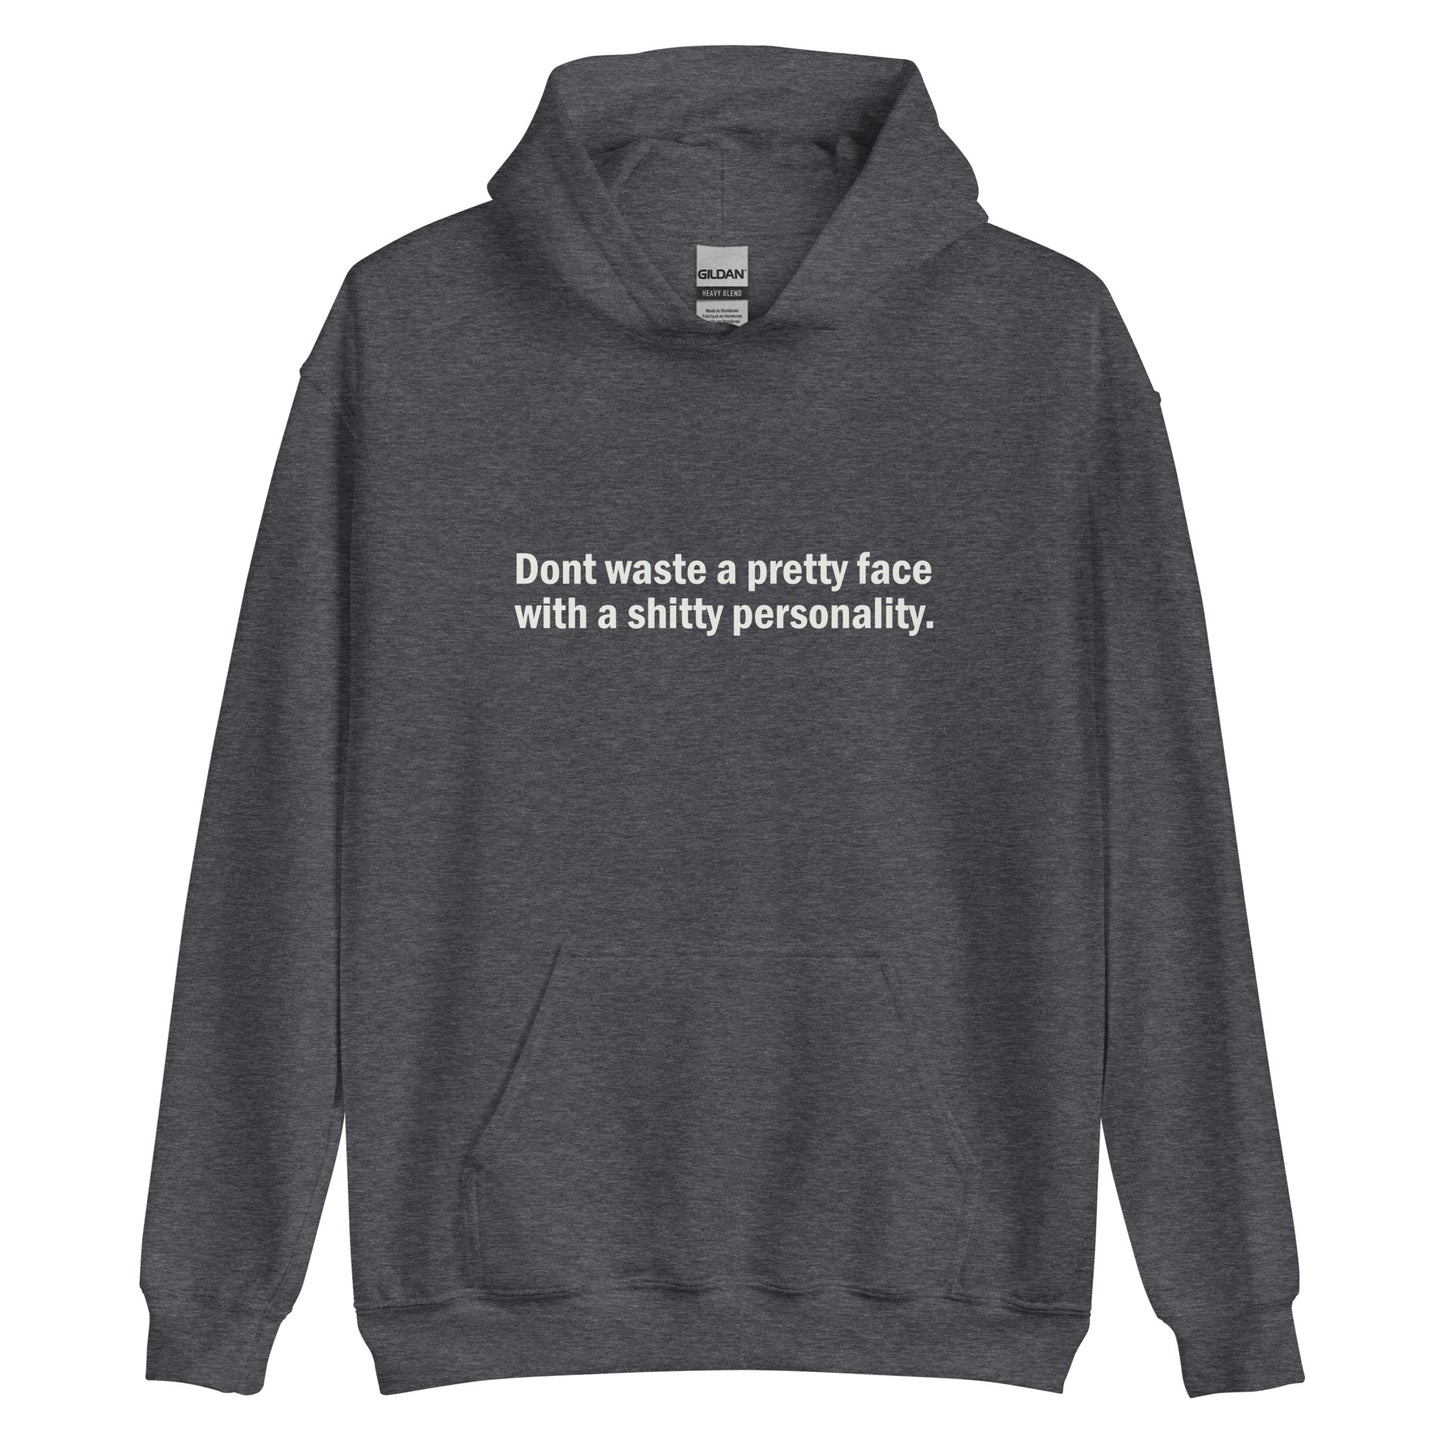 Don't waste a pretty face with a shitty personality hoodie